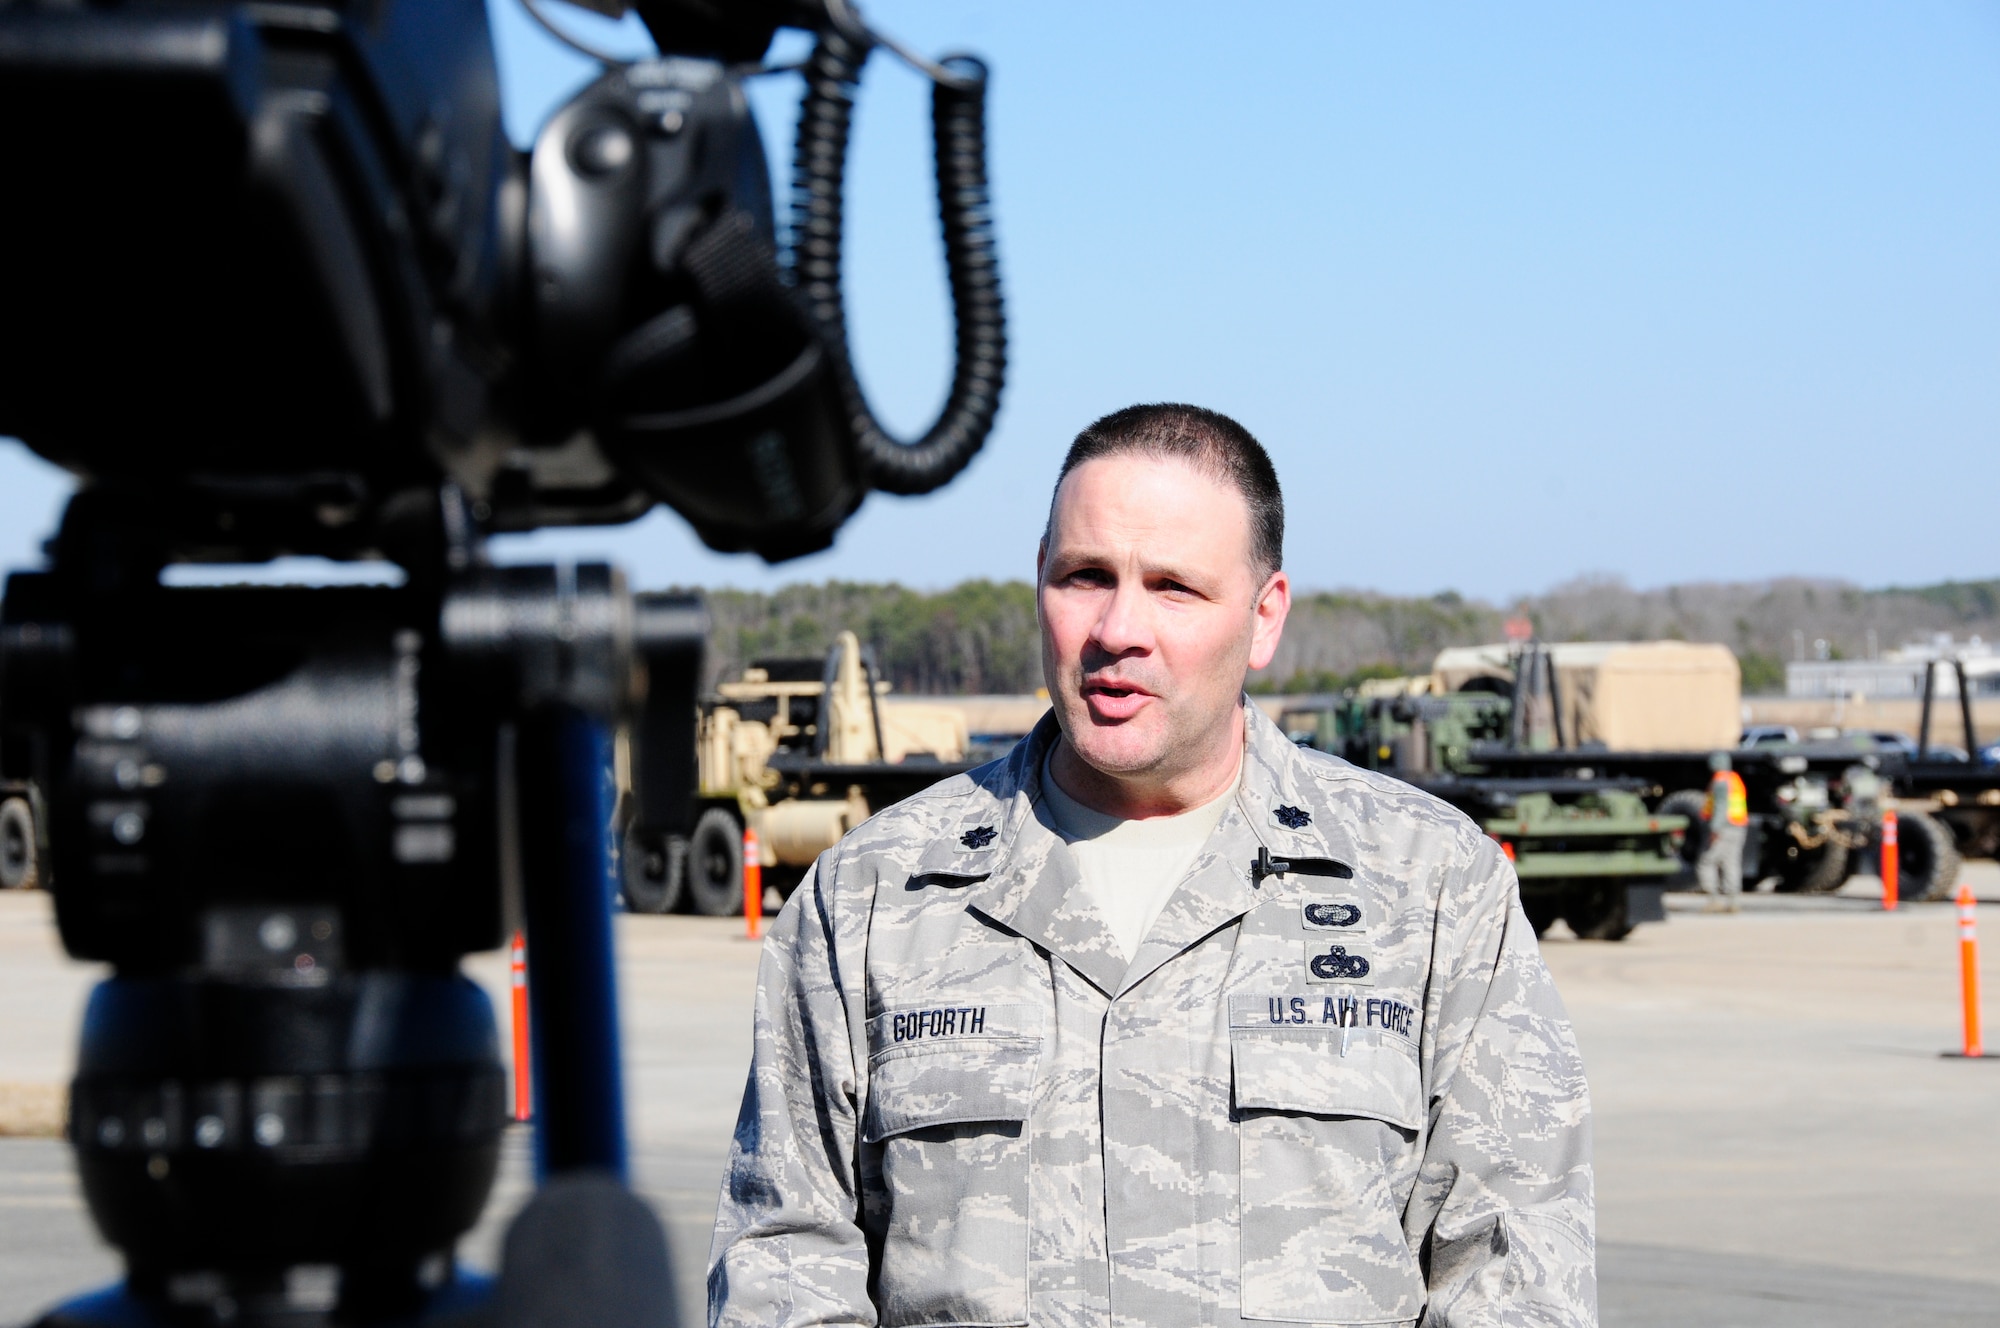 U.S. Air Force Lt. Col. Gregory Goforth, deputy commander for 145th Mission Support Group, explains to local media that, for the first time, N.C. National Guard, Emergency Management and Forest Service personnel came together to train as true partners in order to respond effectively to natural disasters. Vigilant Guard 2015 exercise was held at 145th Civil Engineer Squadron-Regional Training Site, New London, N.C., March 6-8, 2015. (U.S. Air National Guard photo by Master Sgt. Patricia F. Moran, 145th Public Affairs/Released)